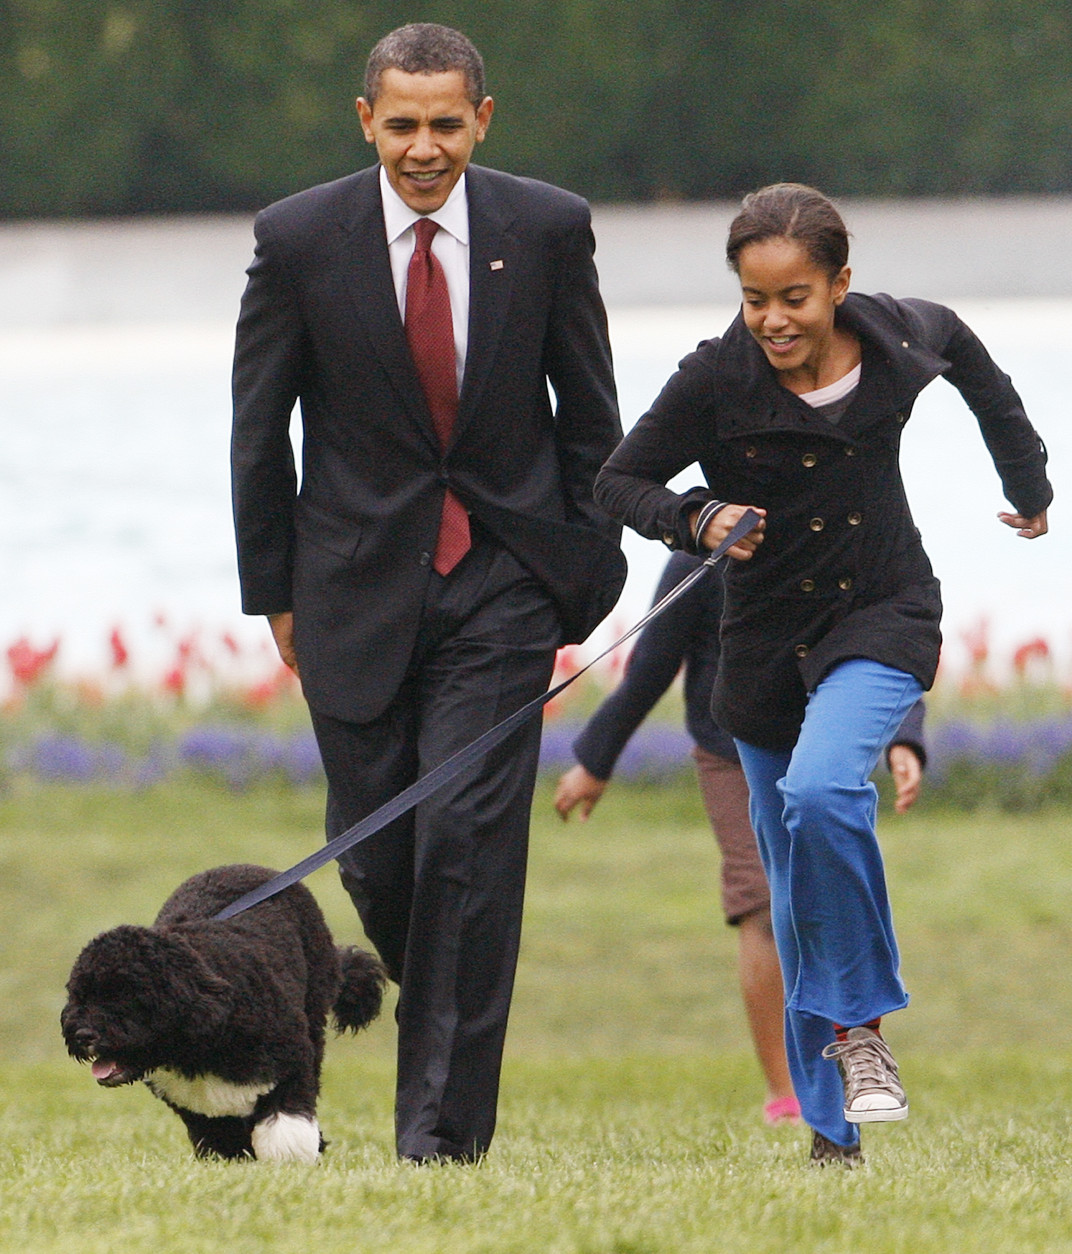 FILE - In this April 14, 2009 file photo, President Barack Obama watches as his daughter Malia walks their new dog Bo on the South Lawn of the White House in Washington. President Barack Obamas daughter Malia was just 10 and longing for a promised puppy when her family moved into the White House. Shes marked some of lifes milestones in the past seven years, and another one comes Friday: graduation from high school.  (AP Photo/Ron Edmonds, file)